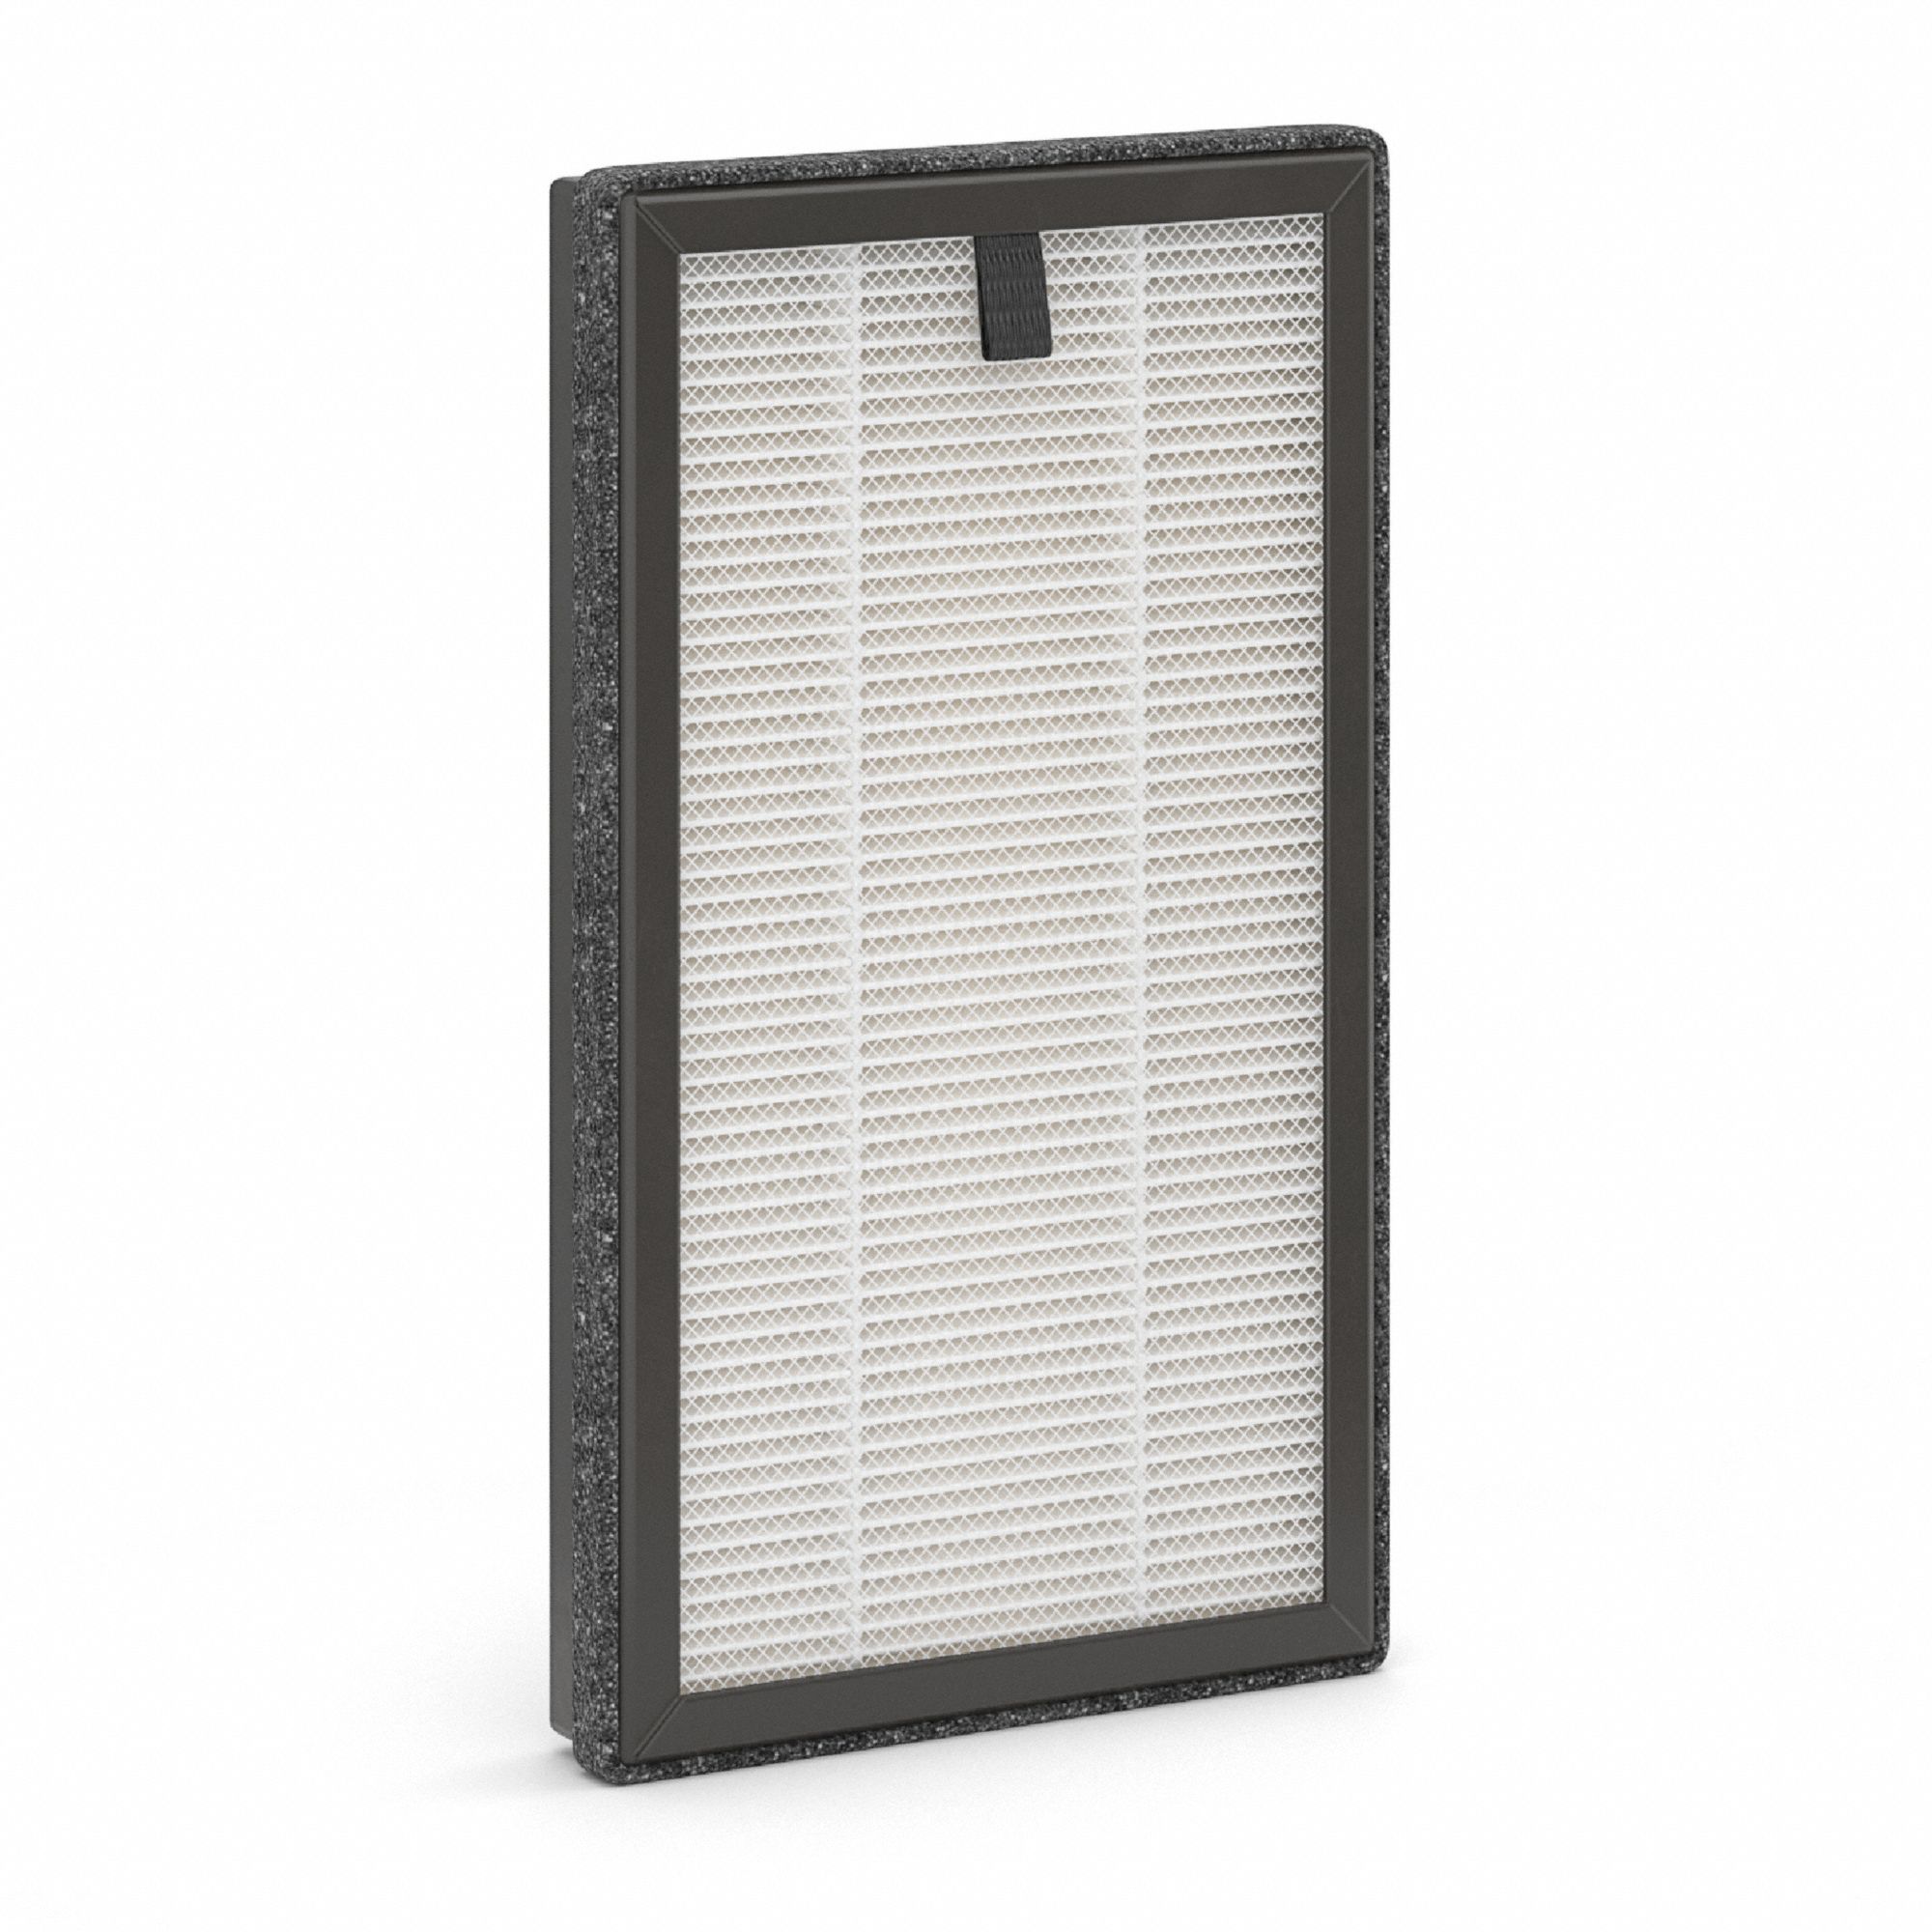 Replacement filter for MA-CAR: HEPA/Pleated/Carbon, MERV 17